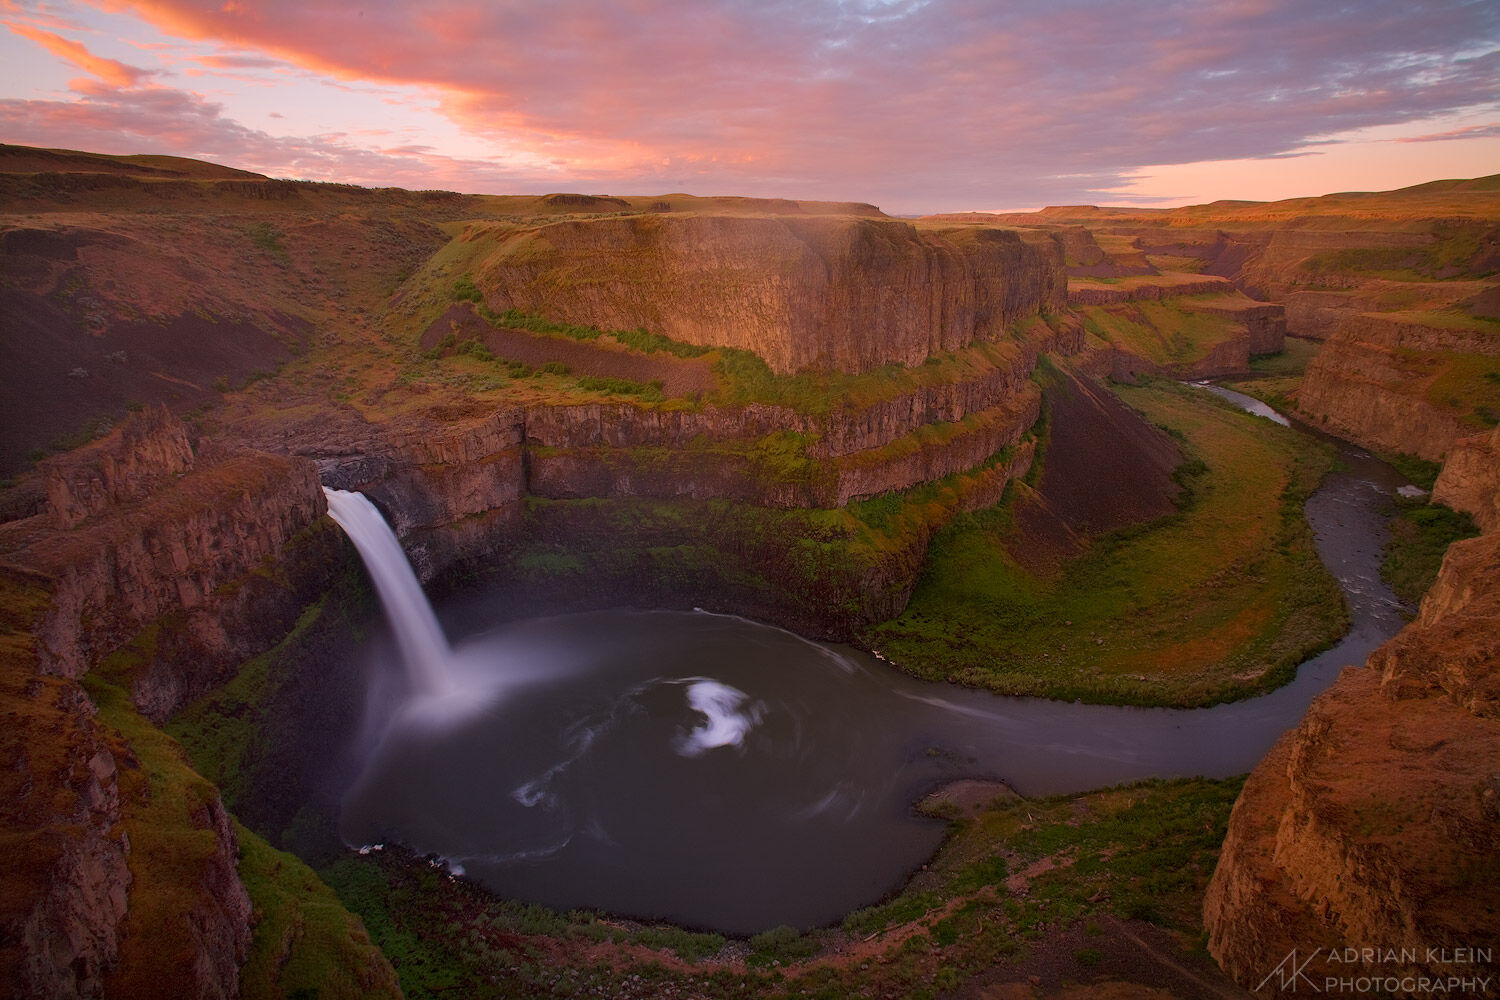 The sky lights up at sunrise over Palouse Falls in SE Washington state.